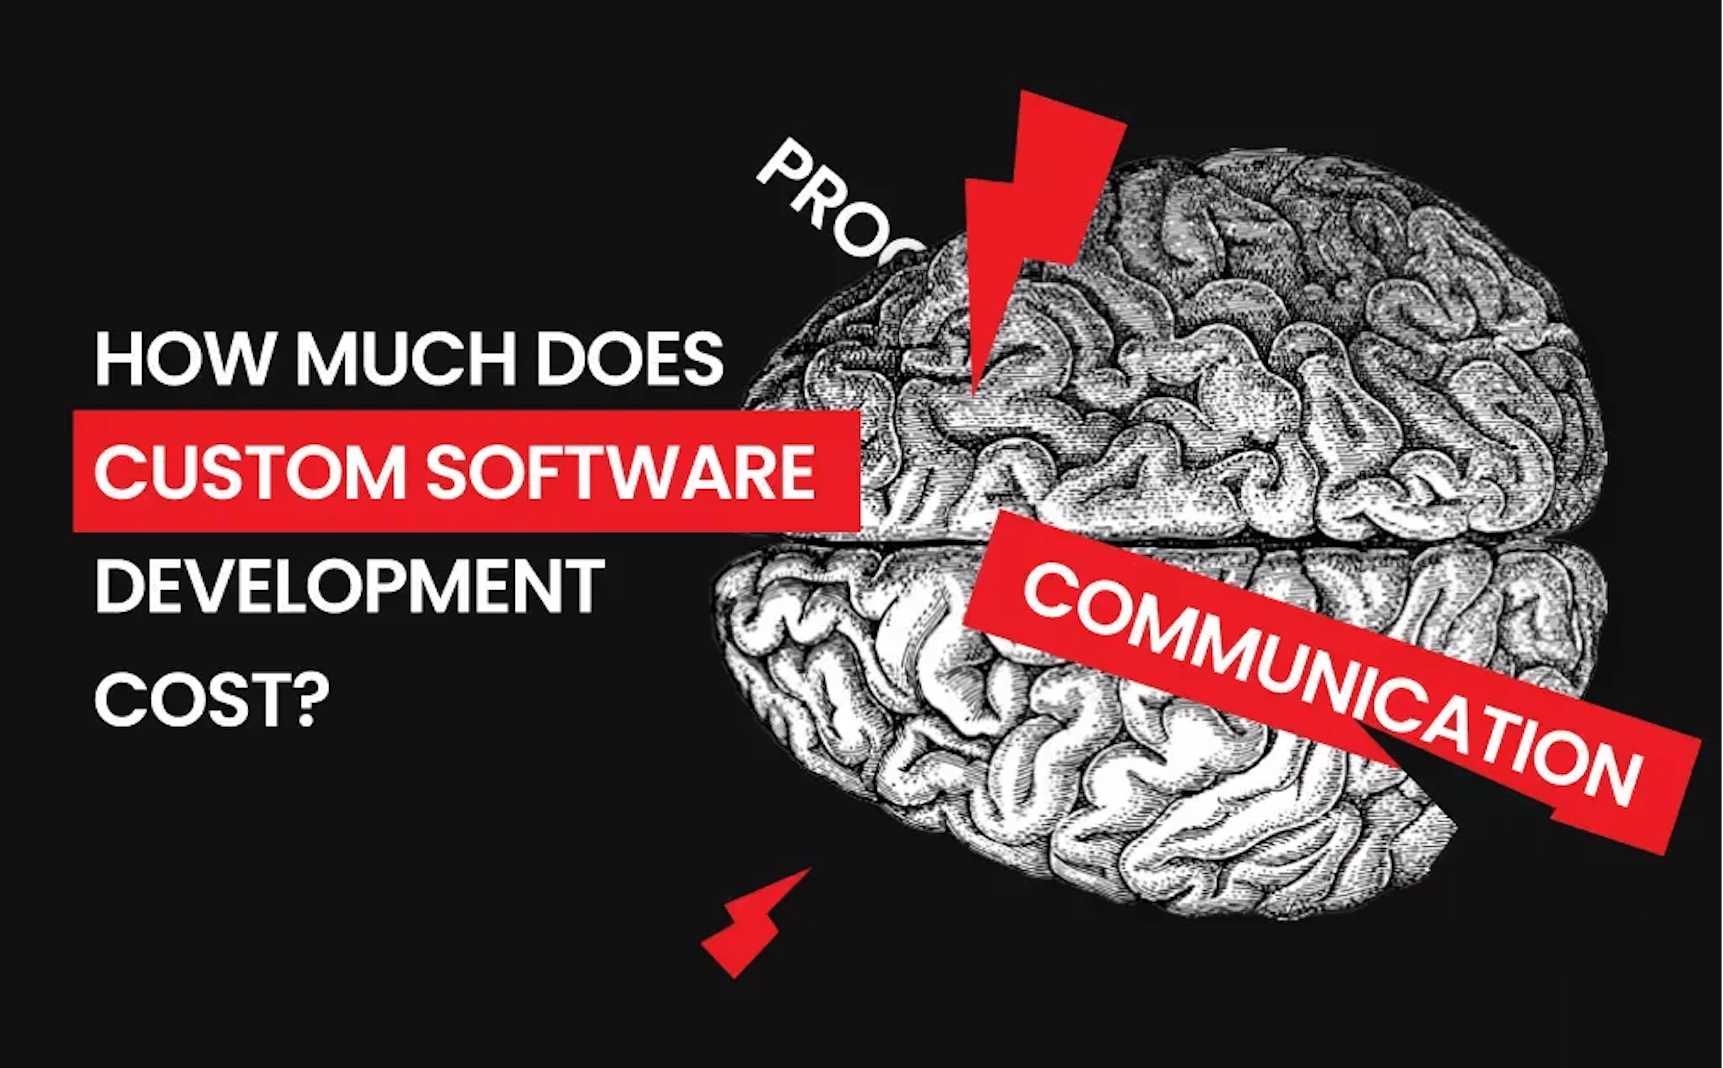 1. How Much Does Custom Software Development Cost?